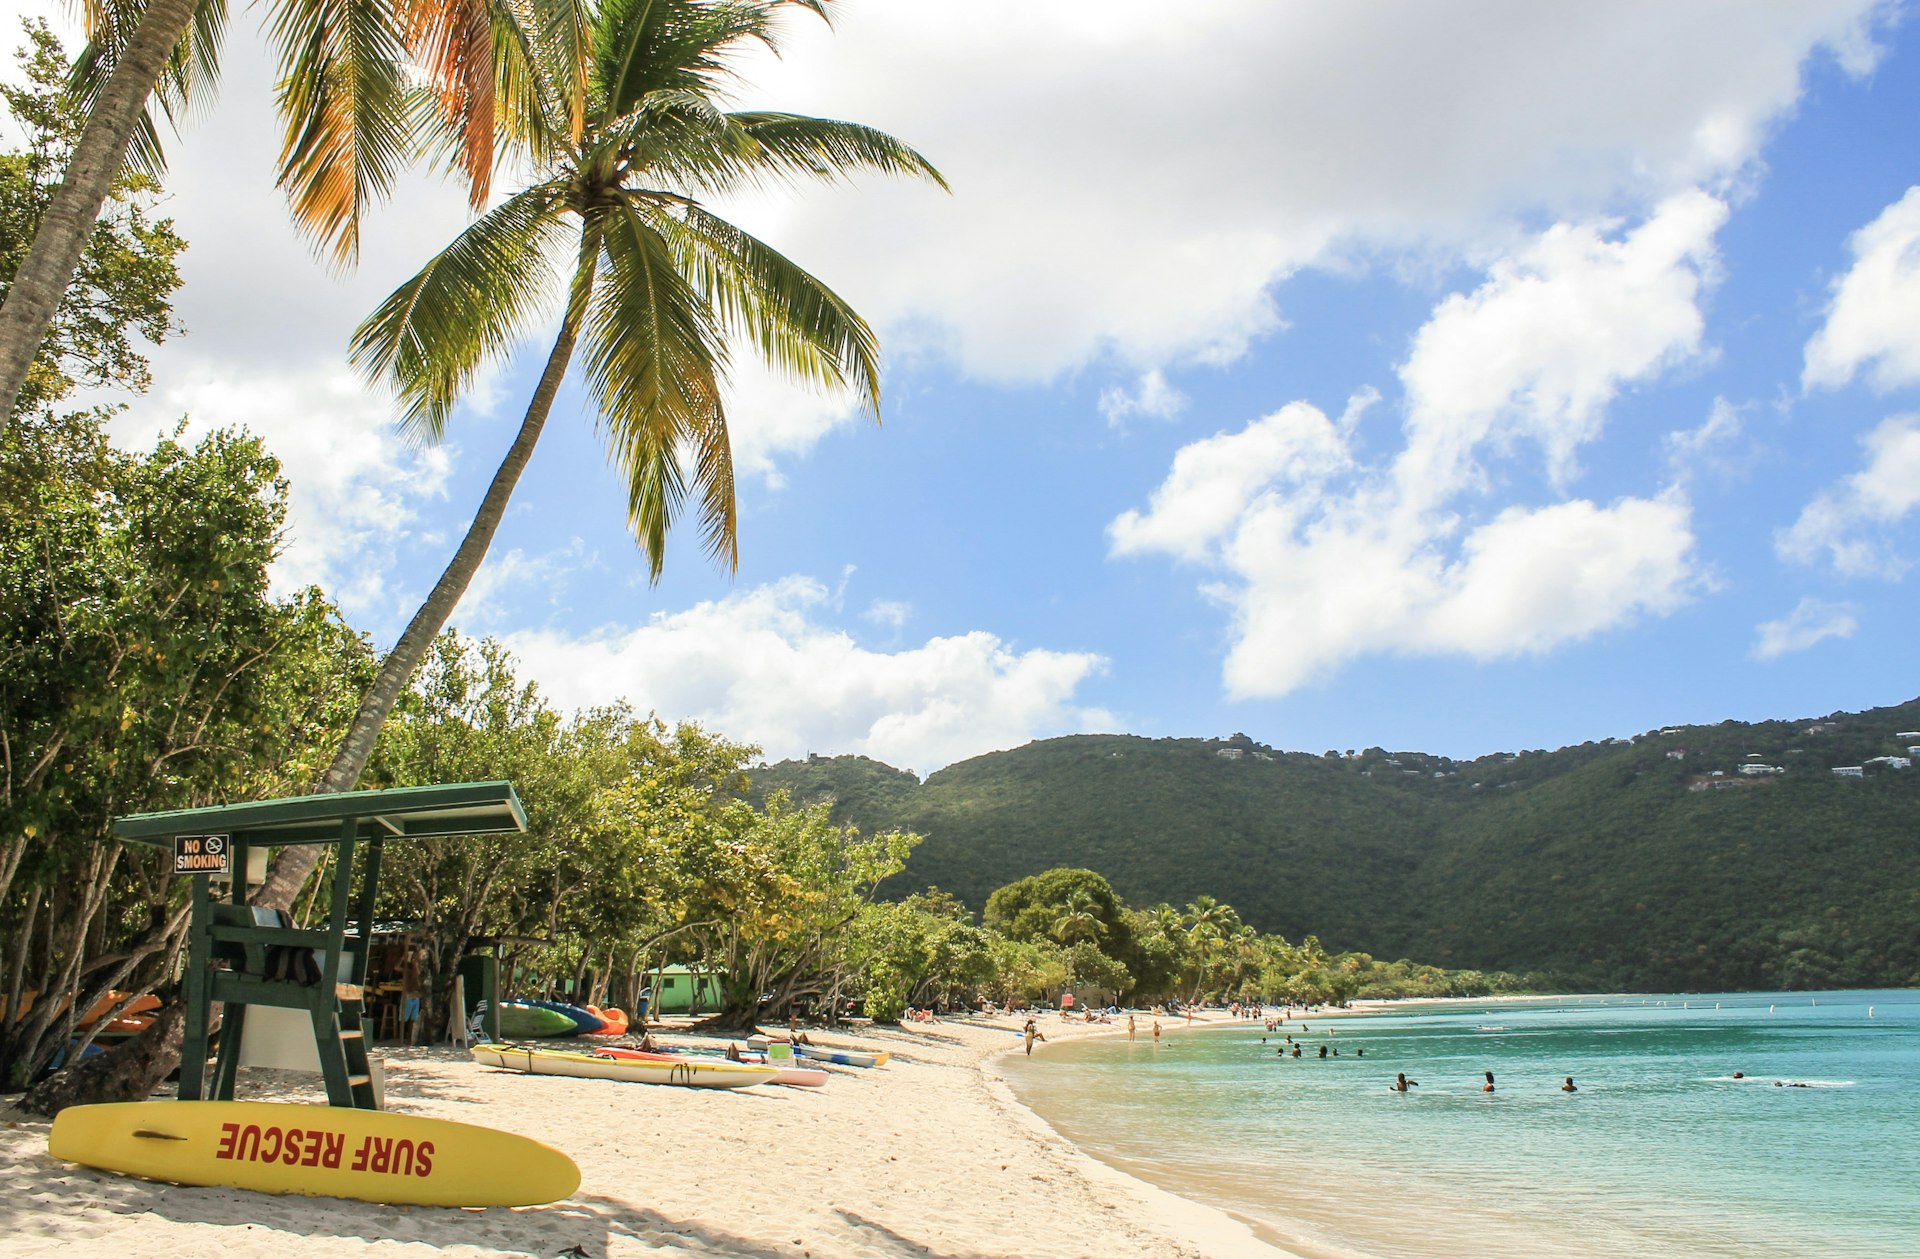 A Caribbean beach with a lifeguard stand in the US Virgin Islands